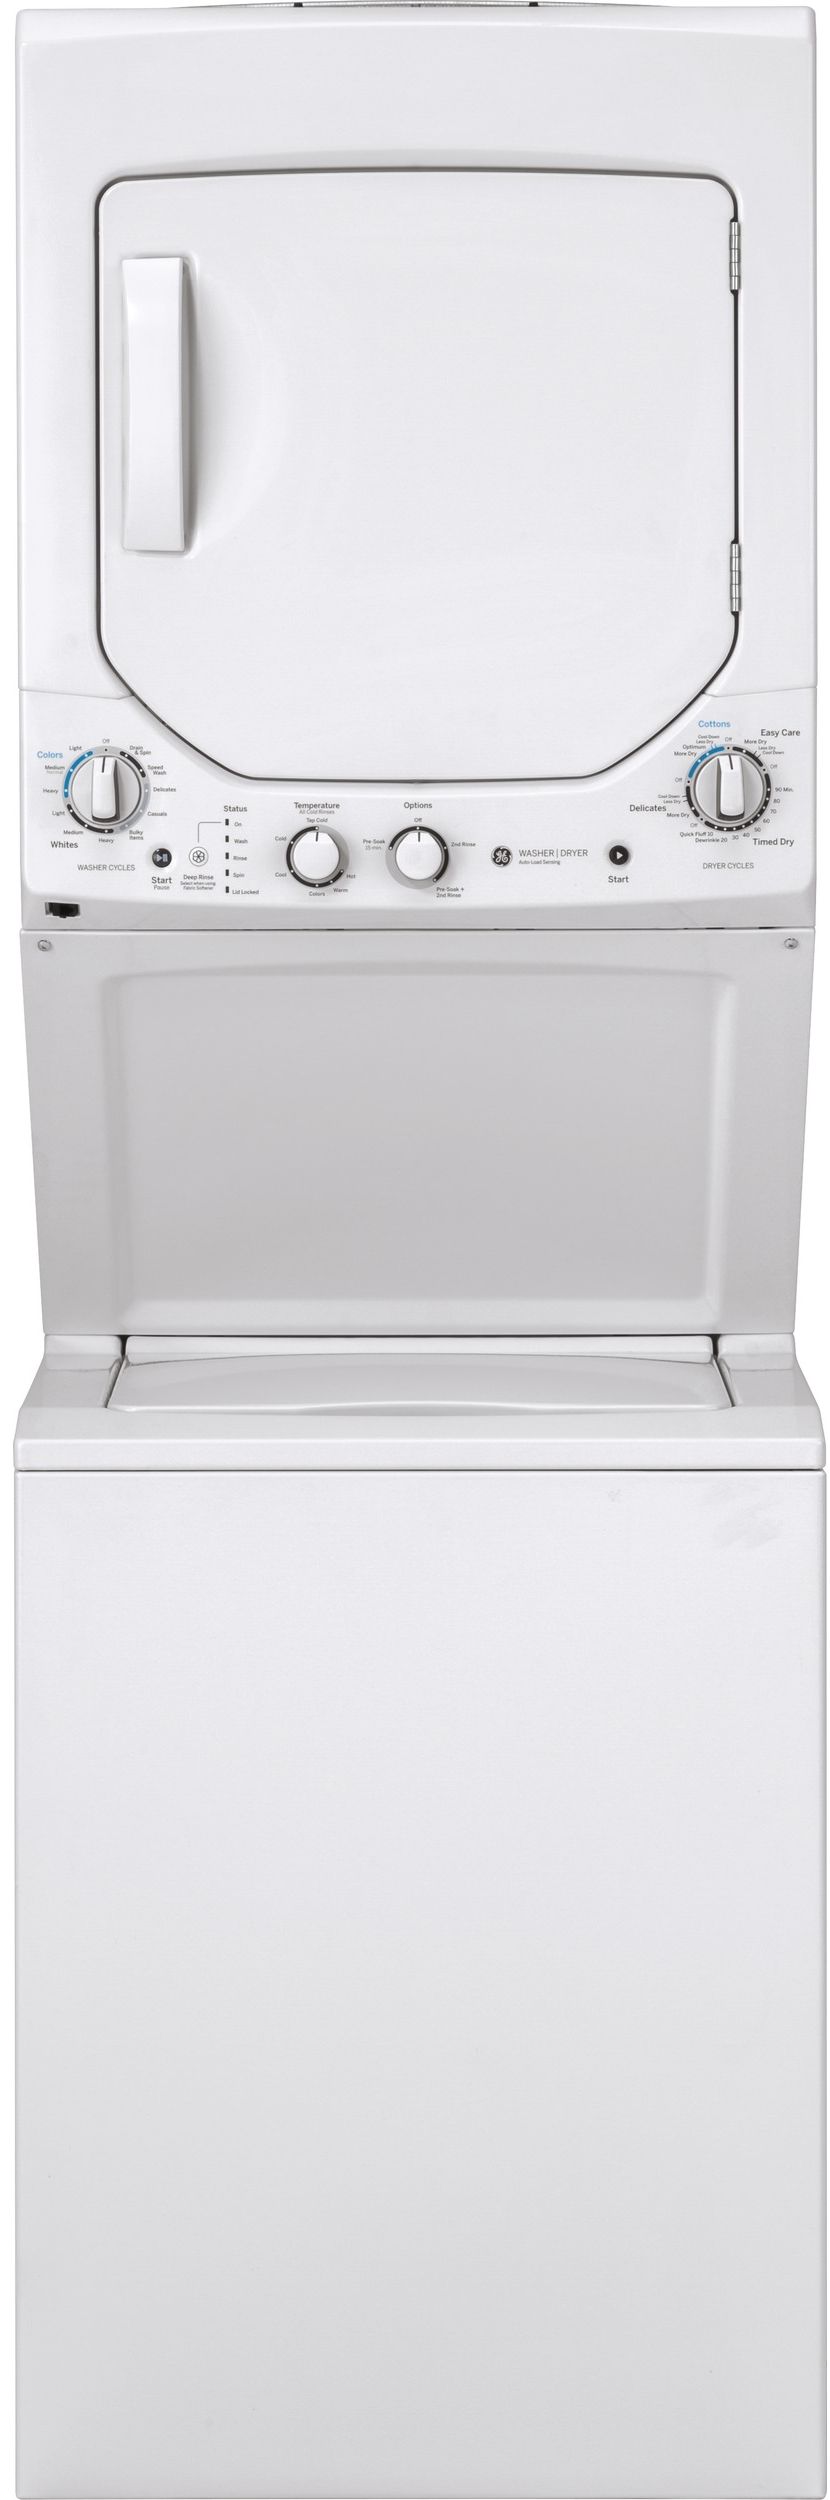 GE® Unitized Spacemaker® 2.3 Cu. Ft. Washer, 4.4 Cu. Ft. Dyer White On White Stack Laundry